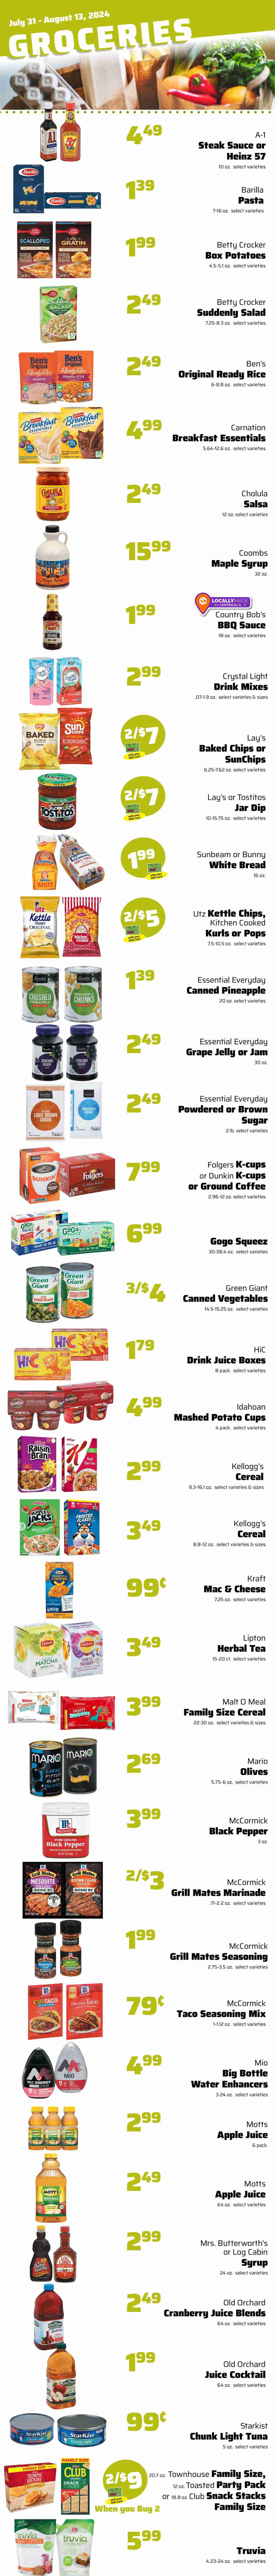 thumbnail - County Market Flyer - 07/31/2024 - 08/13/2024 - Sales products - white bread, corn, green beans, Mott's, diced fruit, tuna, StarKist, mac and cheese, mashed potatoes, spaghetti, Barilla, Kraft®, pasta salad, ready meal, rice sides, sliced cheese, jelly, milk chocolate, crackers, Kellogg's, Lay’s, Tostitos, Kettle chips, salty snack, icing sugar, stevia, sweetener, canned tuna, Heinz, olives, canned vegetables, light tuna, Uncle Ben's, canned fruit, canned fish, Frosted Flakes, Raisin Bran, black pepper, cinnamon, seasoning, BBQ sauce, steak sauce, salsa, marinade, peanut oil, grape jelly, maple syrup, syrup, jam, apple juice, cranberry juice, lemonade, Lipton, fruit drink, green tea, matcha, herbal tea, tea bags, coffee, Folgers, ground coffee, coffee capsules, K-Cups, Keurig, alcohol, punch, TRULY, baby food pouch, baby snack. Page 10.